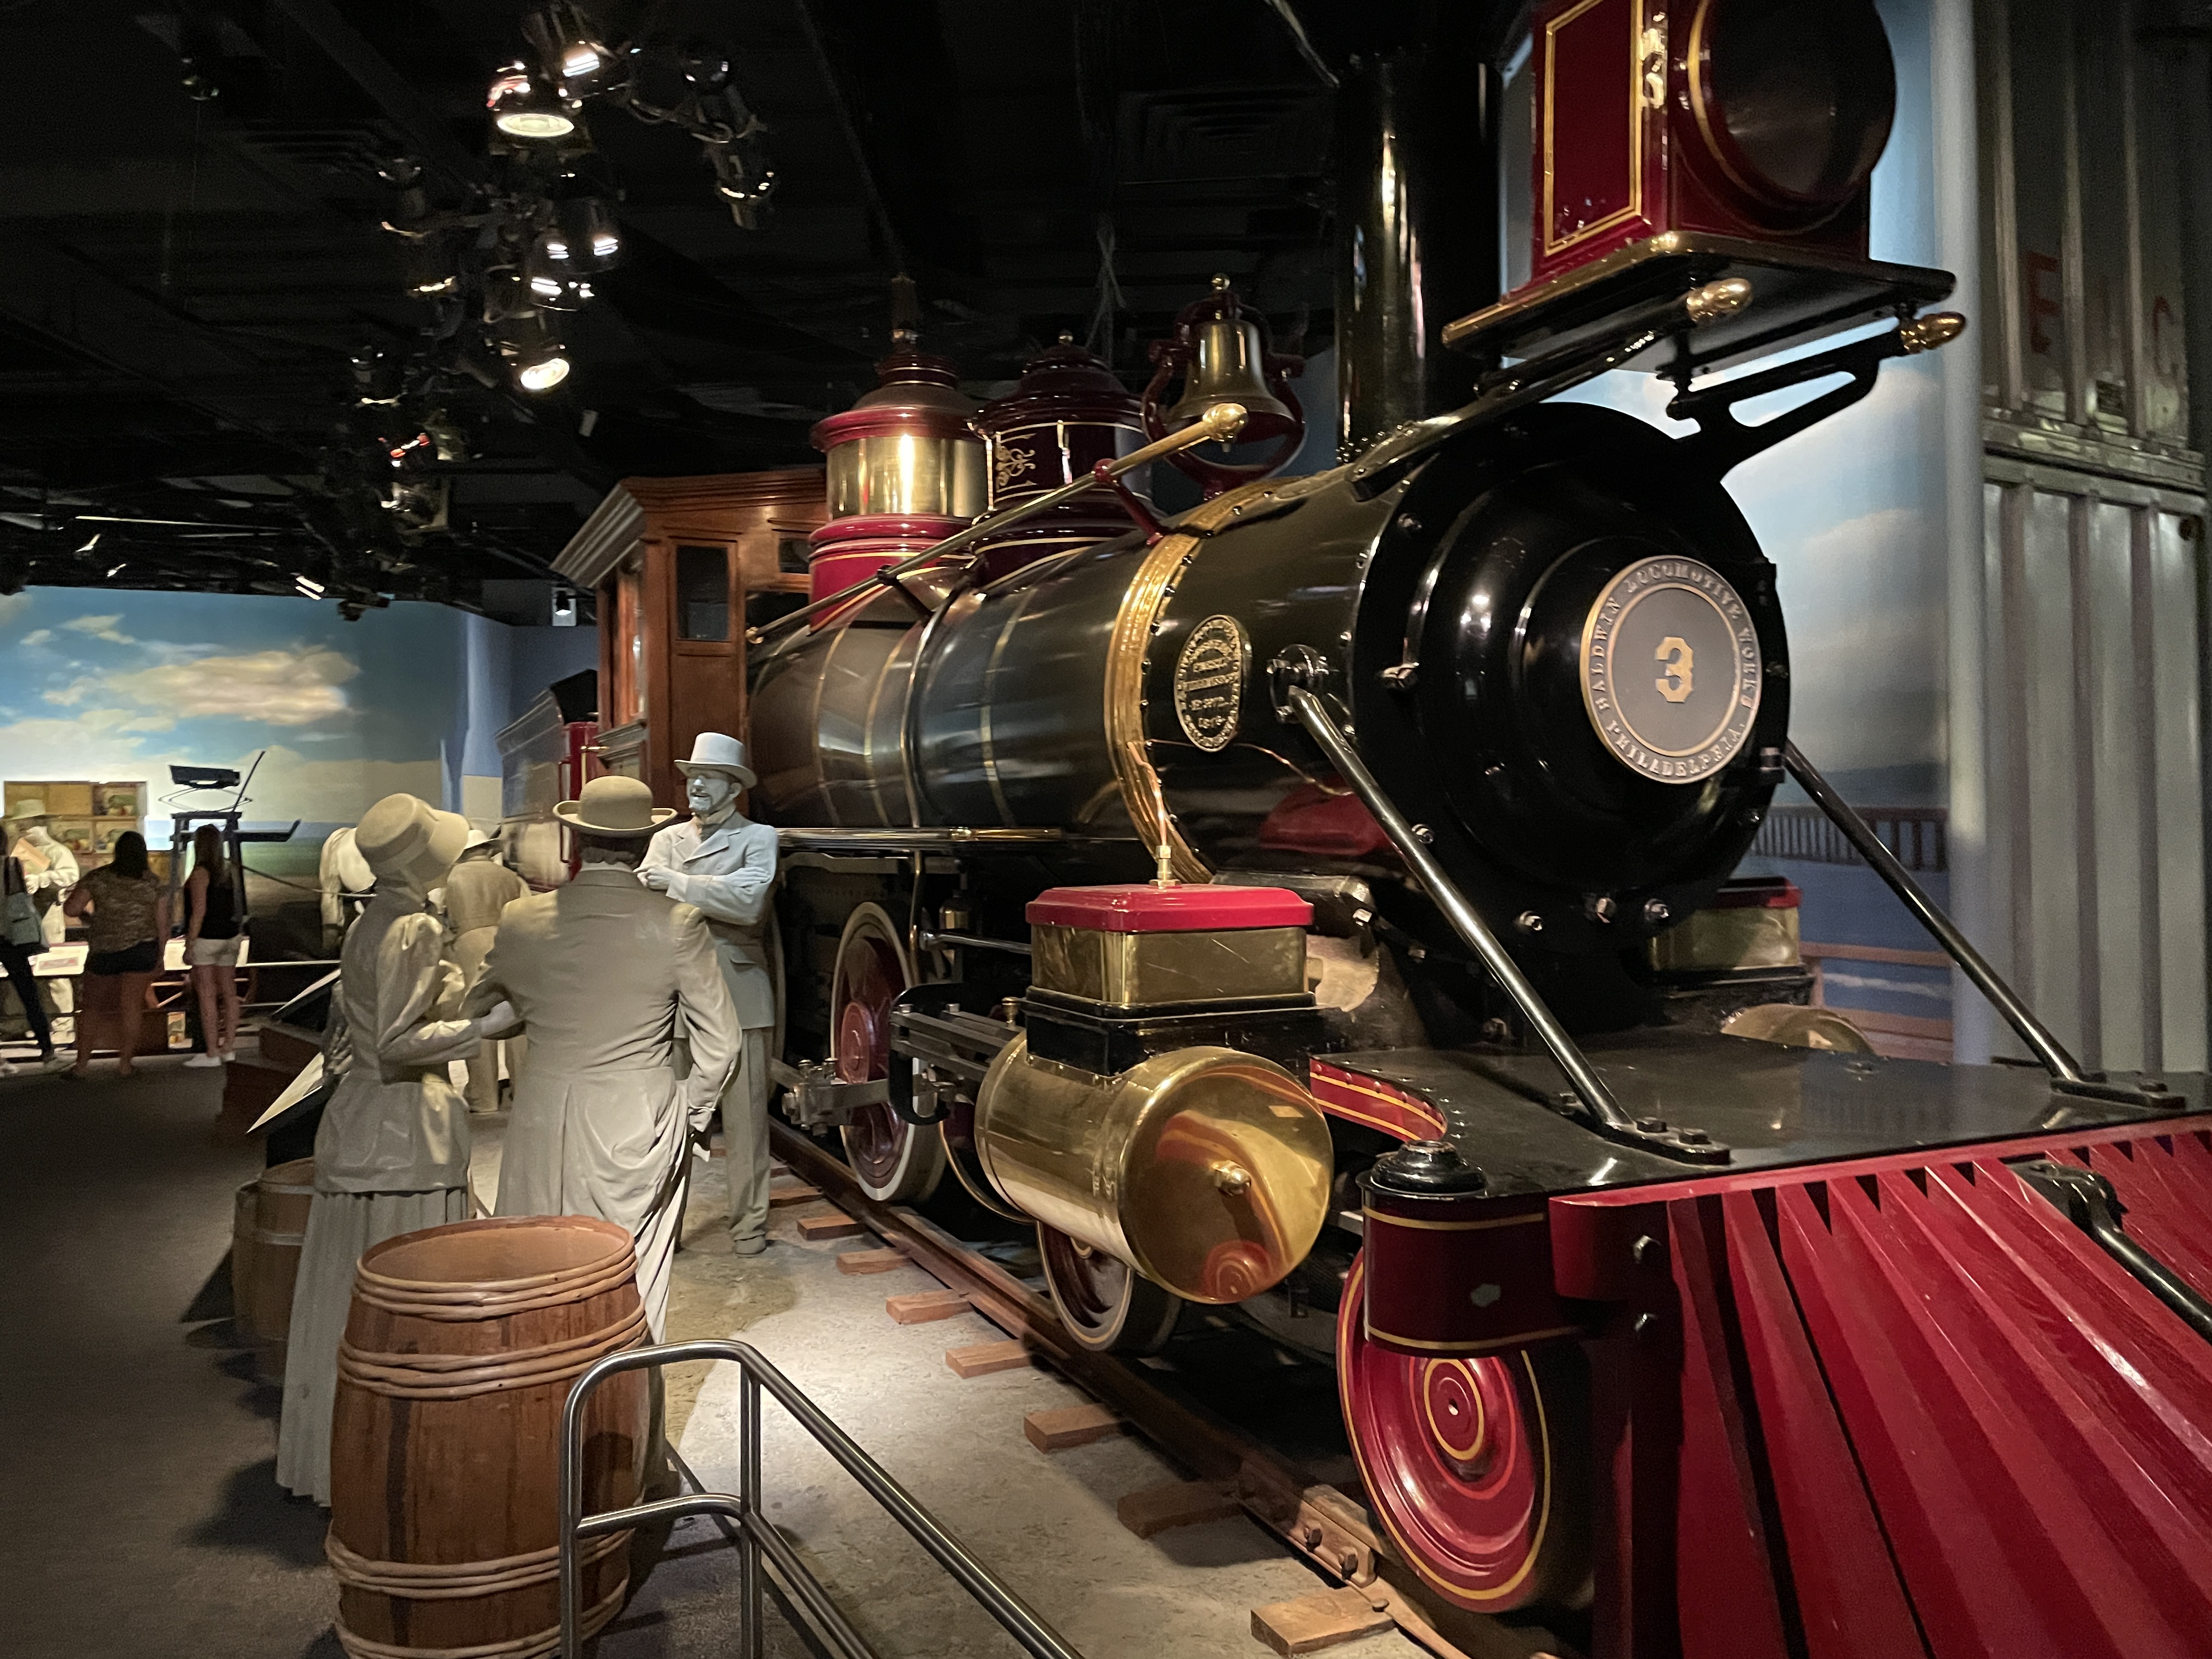 Train Exhibit in the American History Museum in Washington, D.C.